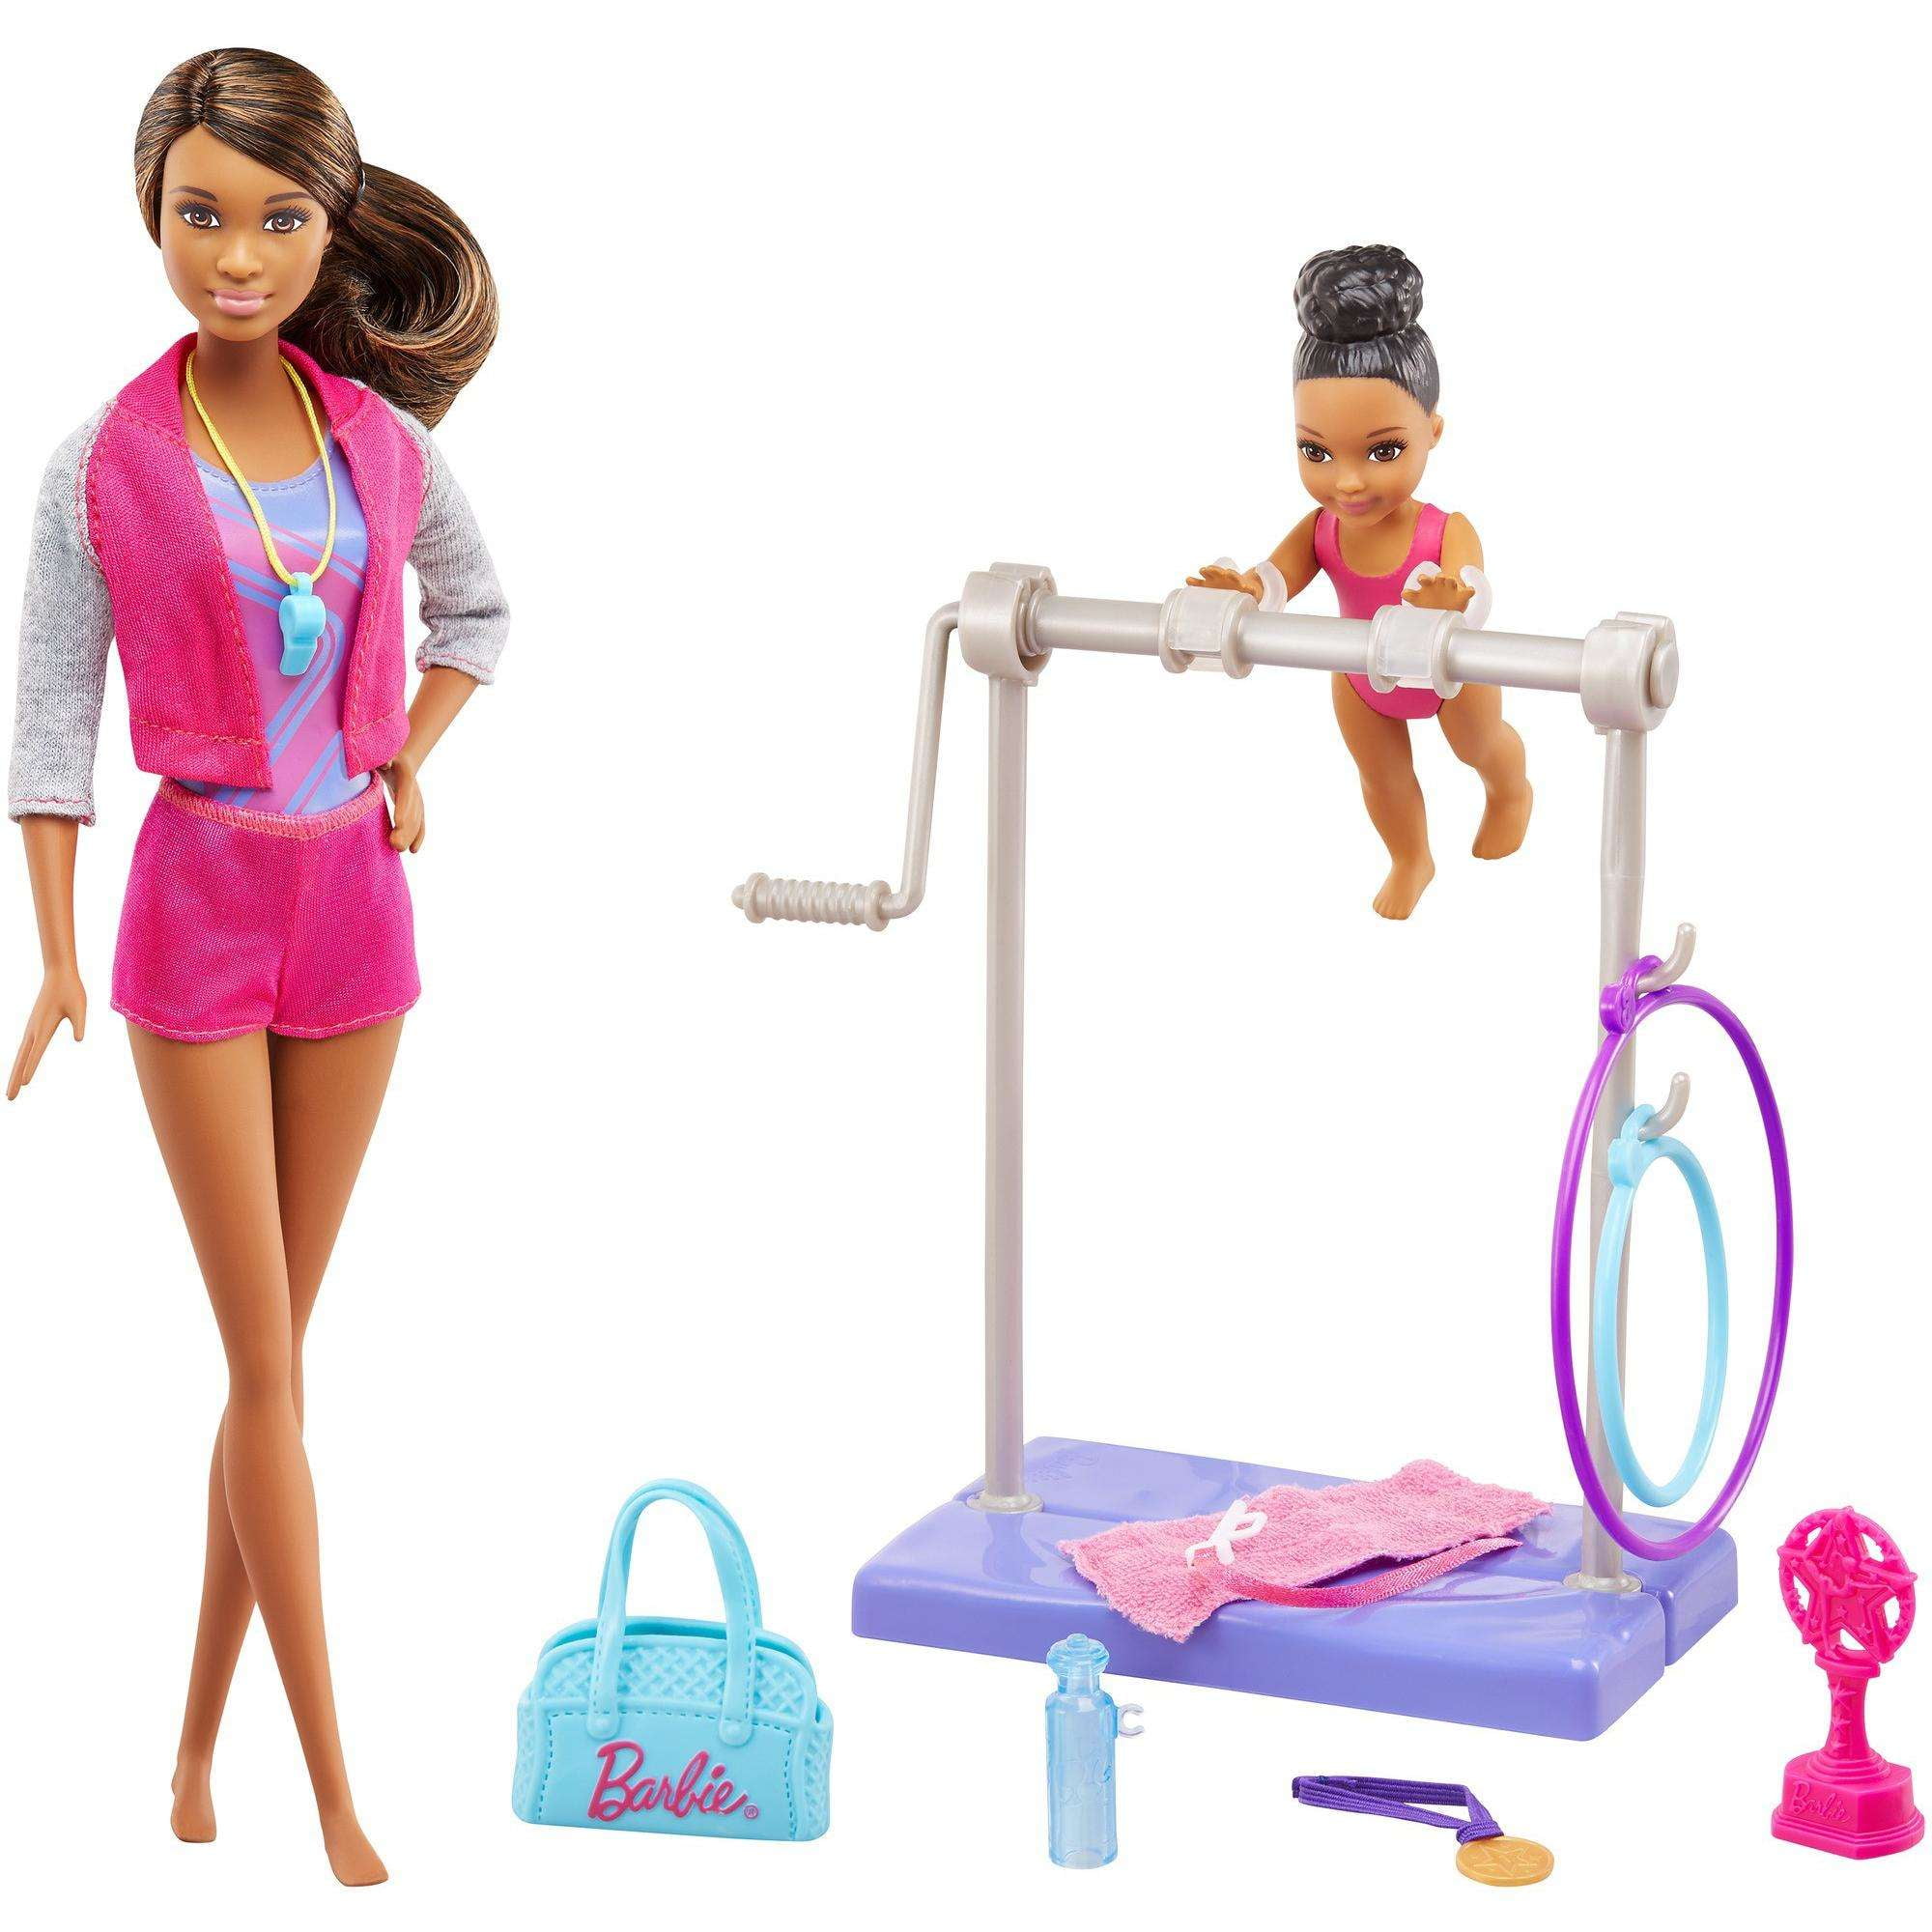 Barbie Gymnastics Playset with Barbie Coach Doll, Small Doll, Spinning Bar,  Hoops, Ribbon & 5+ Accessories